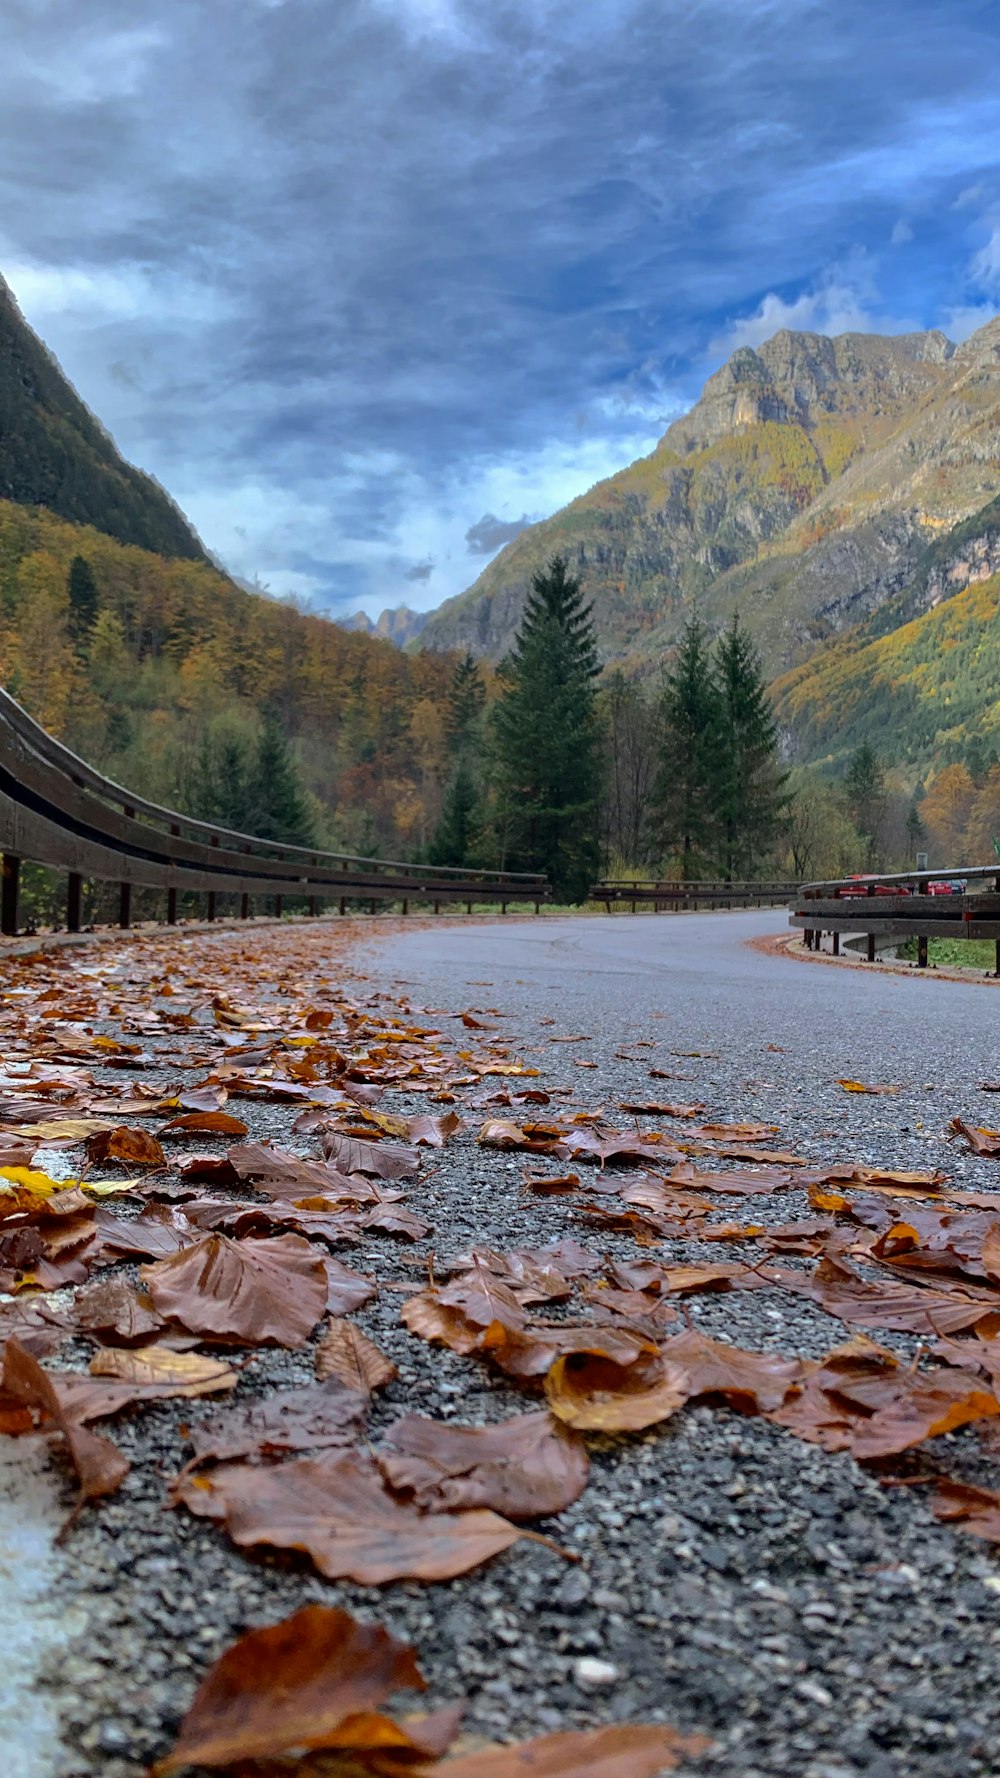 a paved road with leaves on the ground and mountains in the background